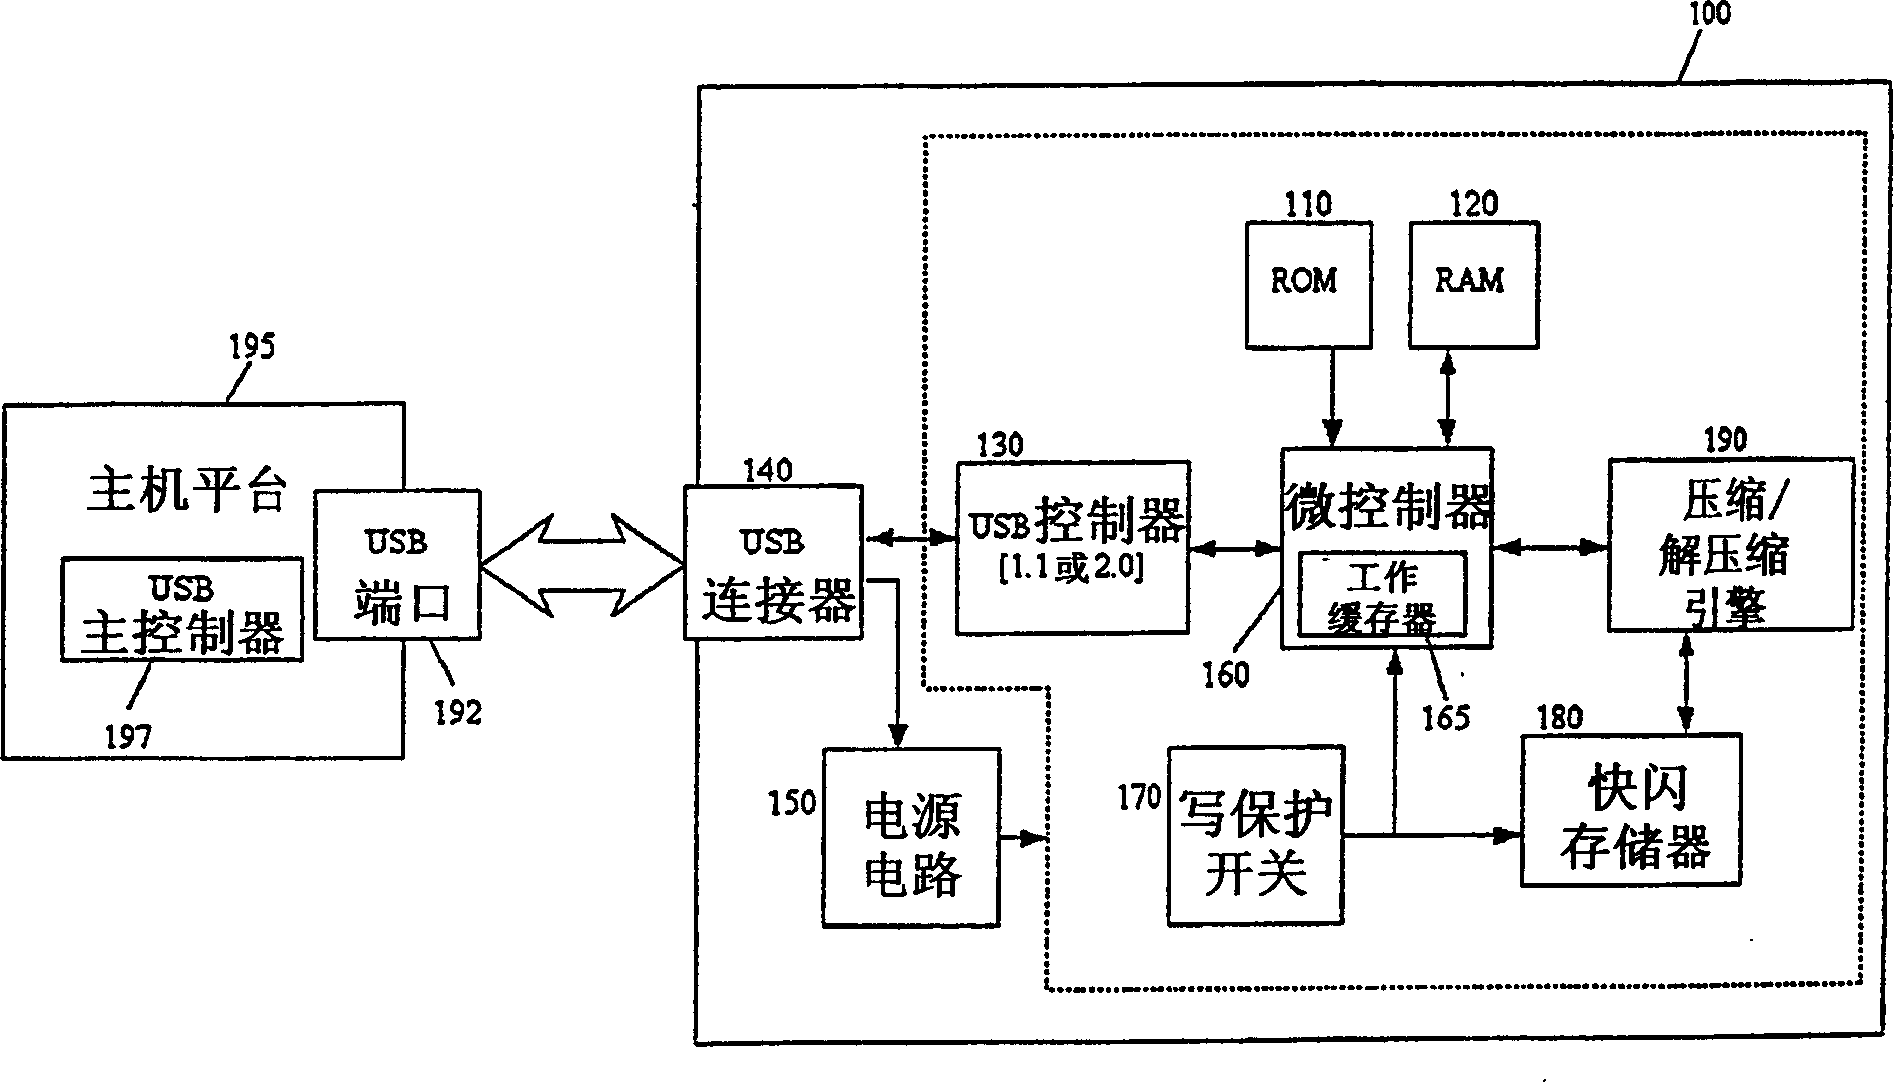 System and device for compressing and decompressing stored data in portable data storage device